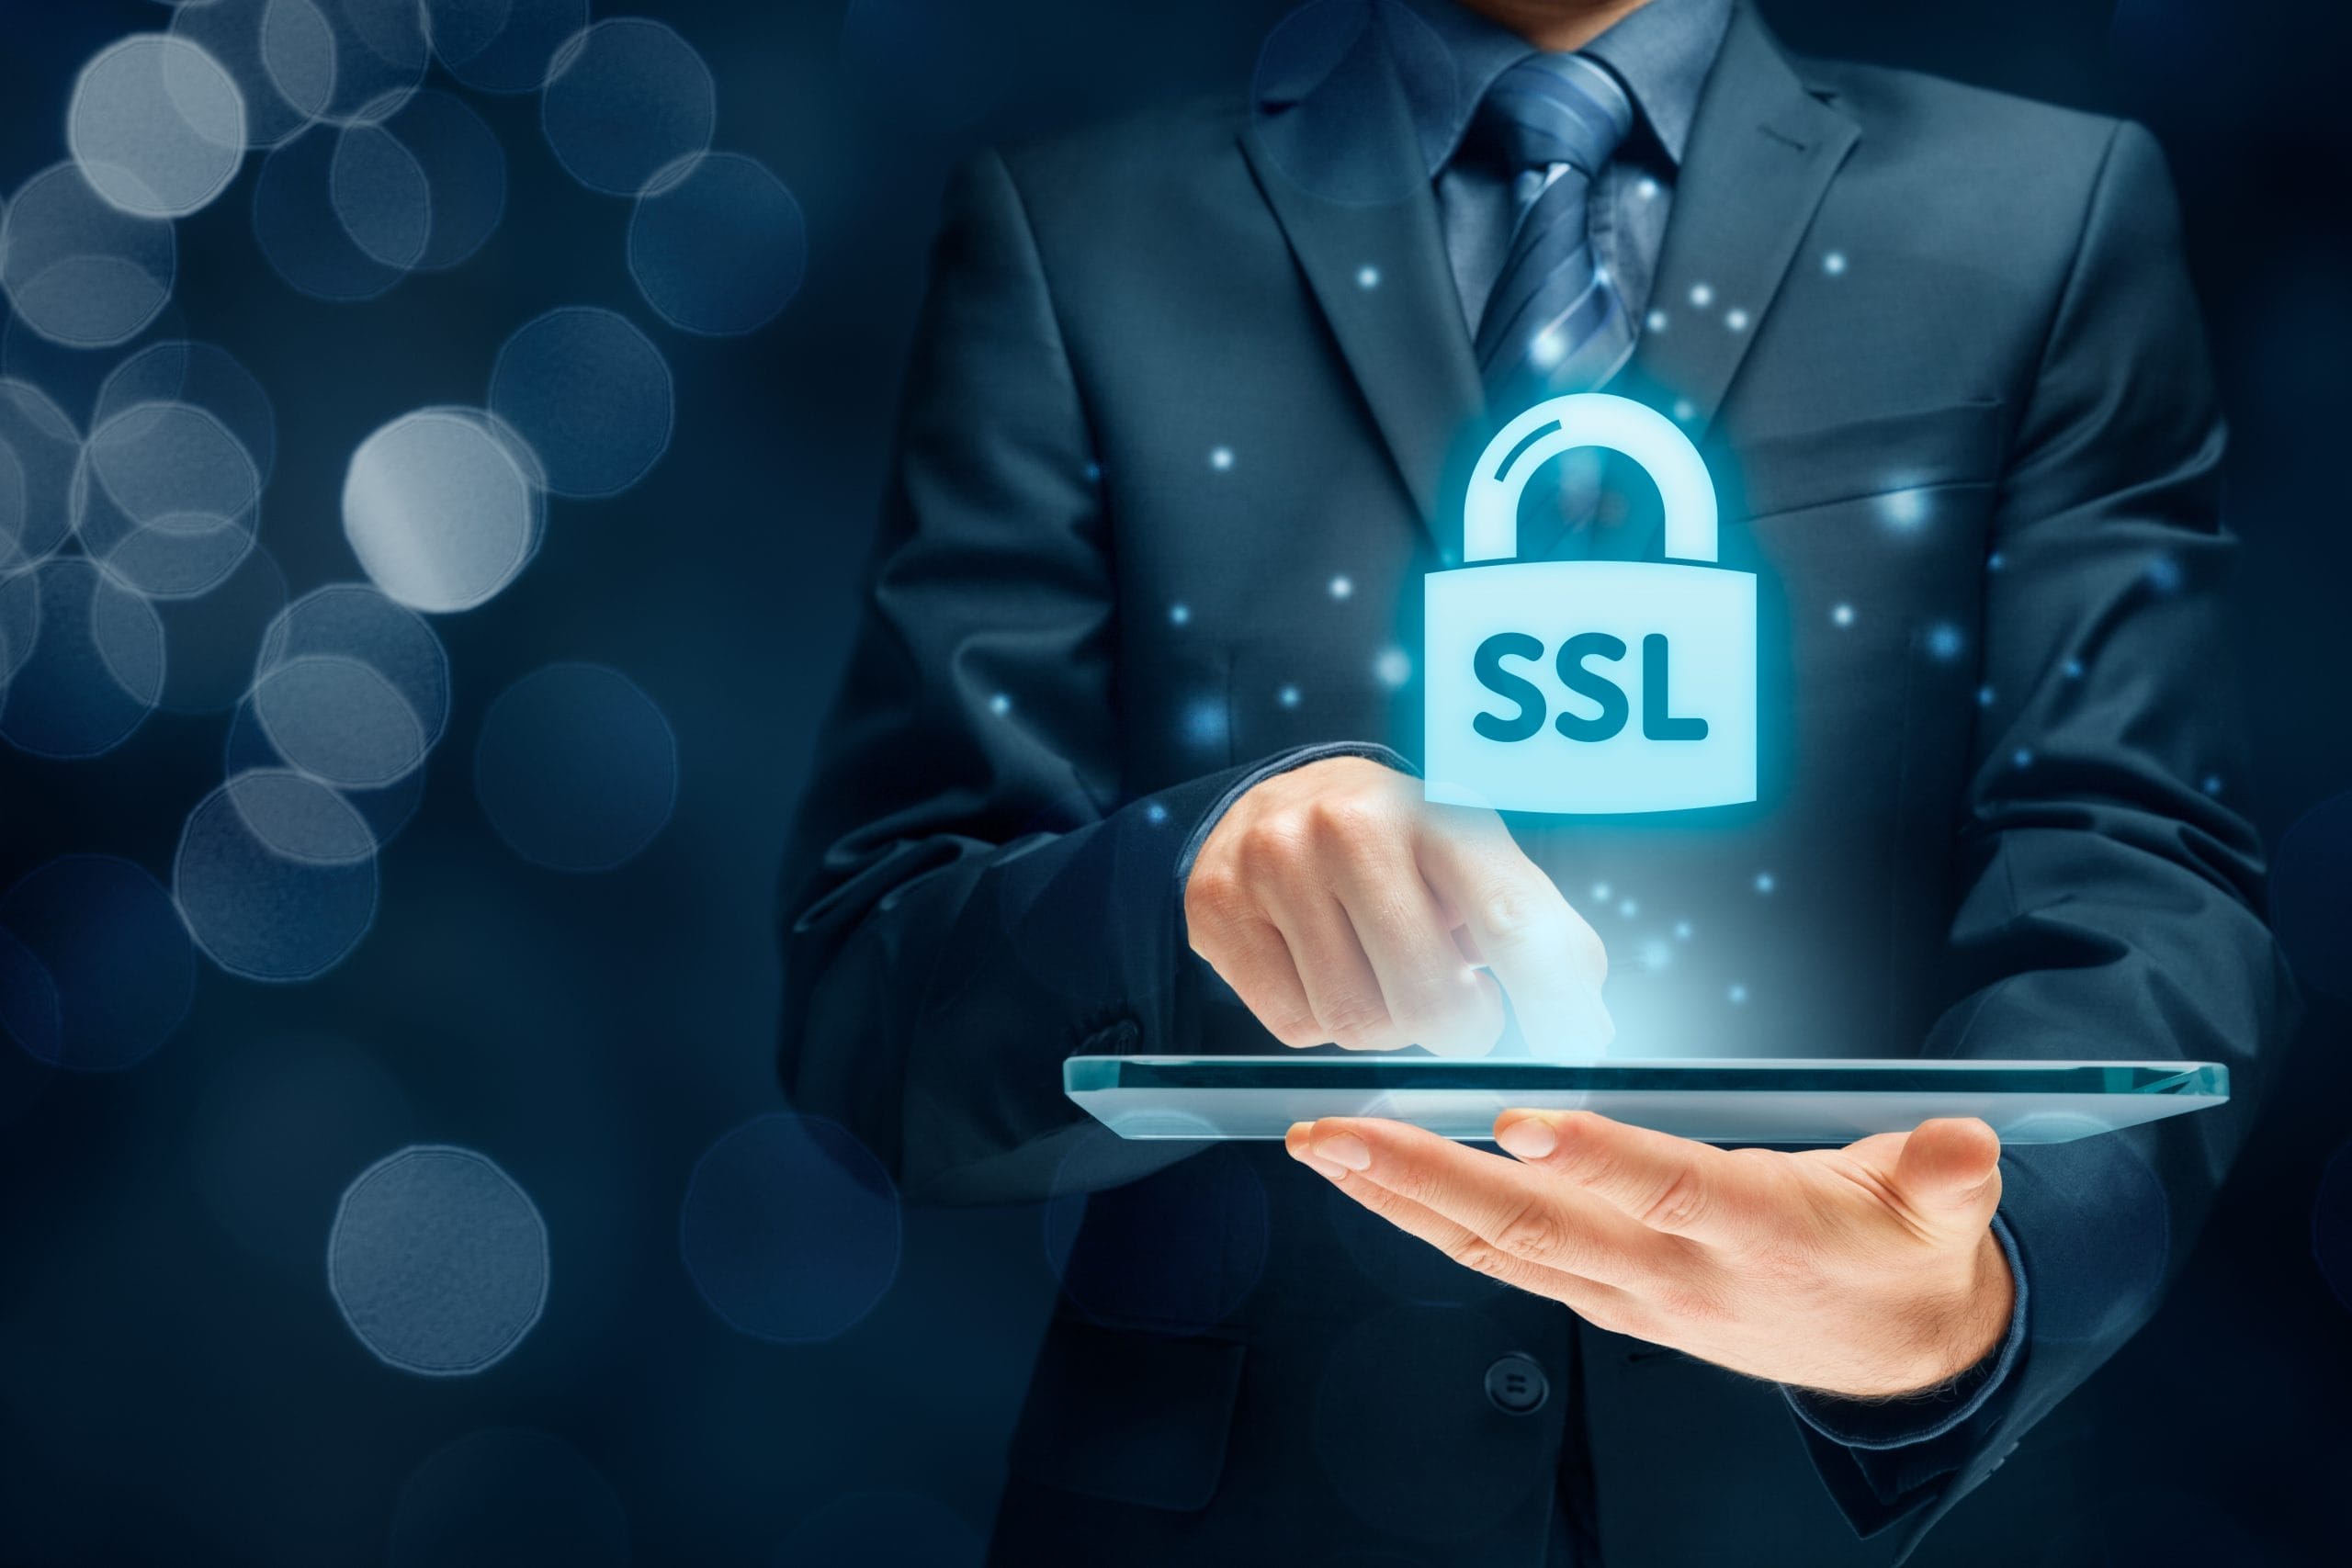 Introducing the Advanced SSL Solution